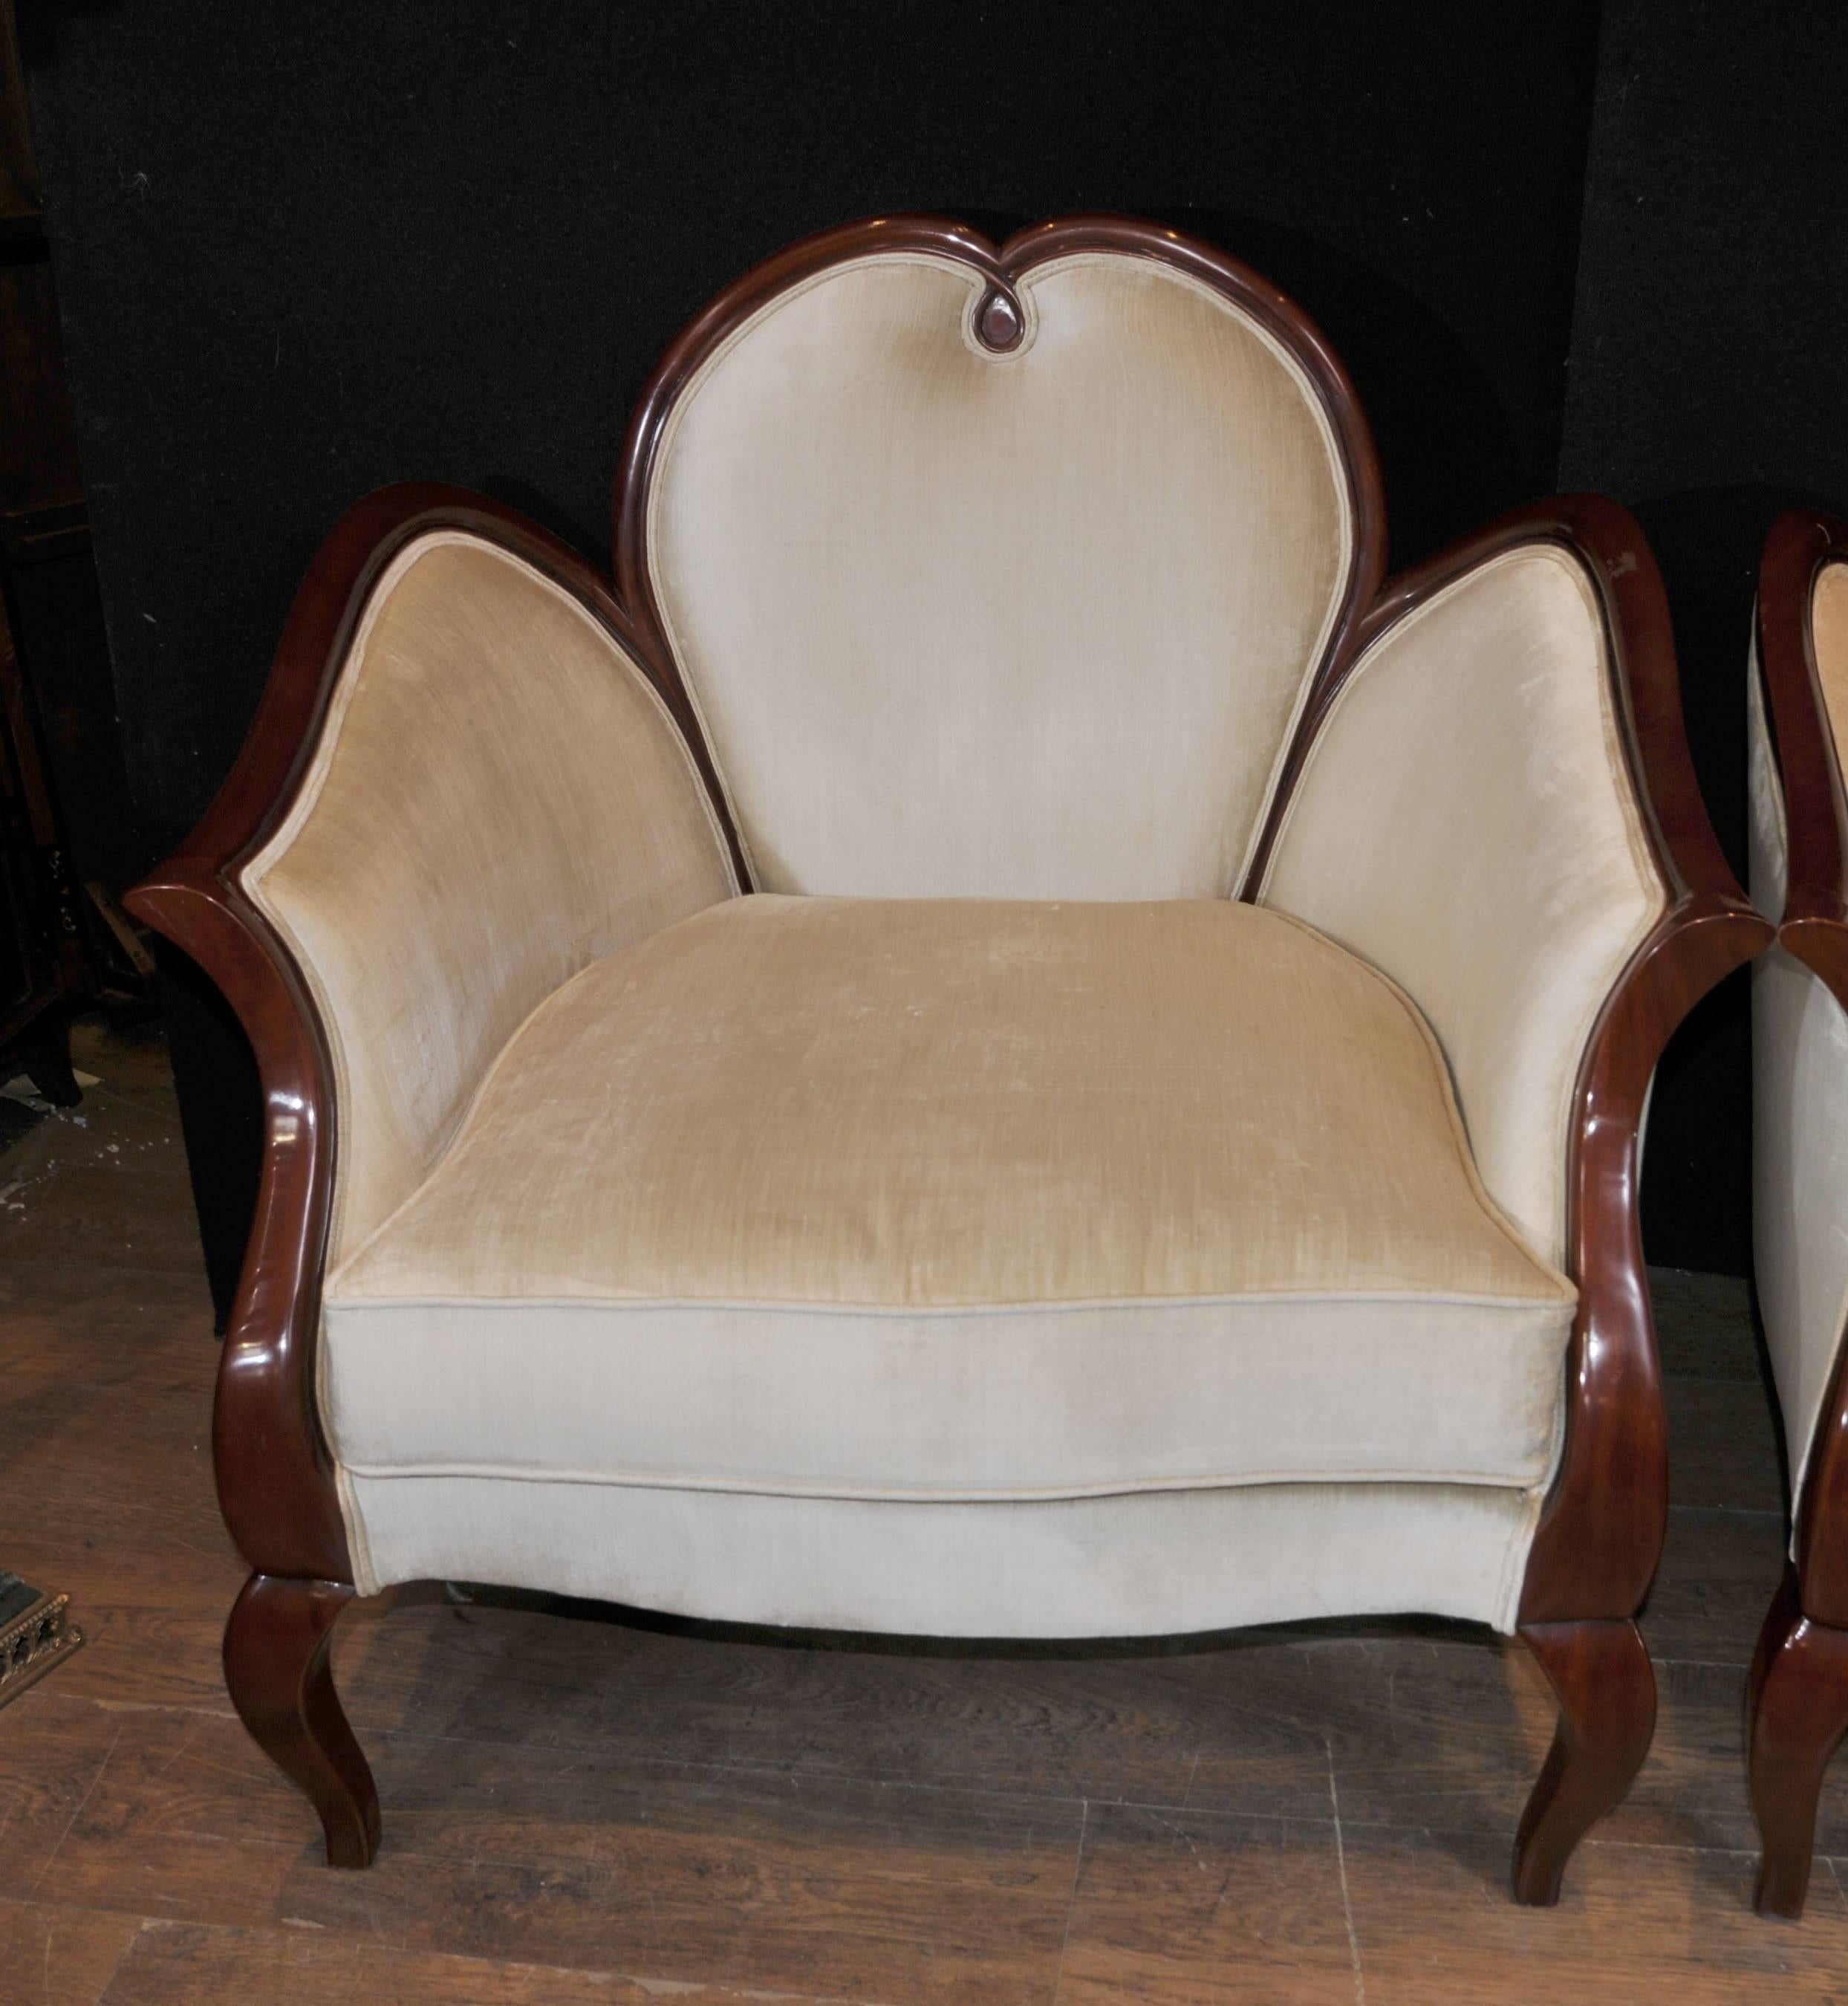 20th Century French Empire Style Heart Arm Chairs Fauteils Regency Furniture For Sale